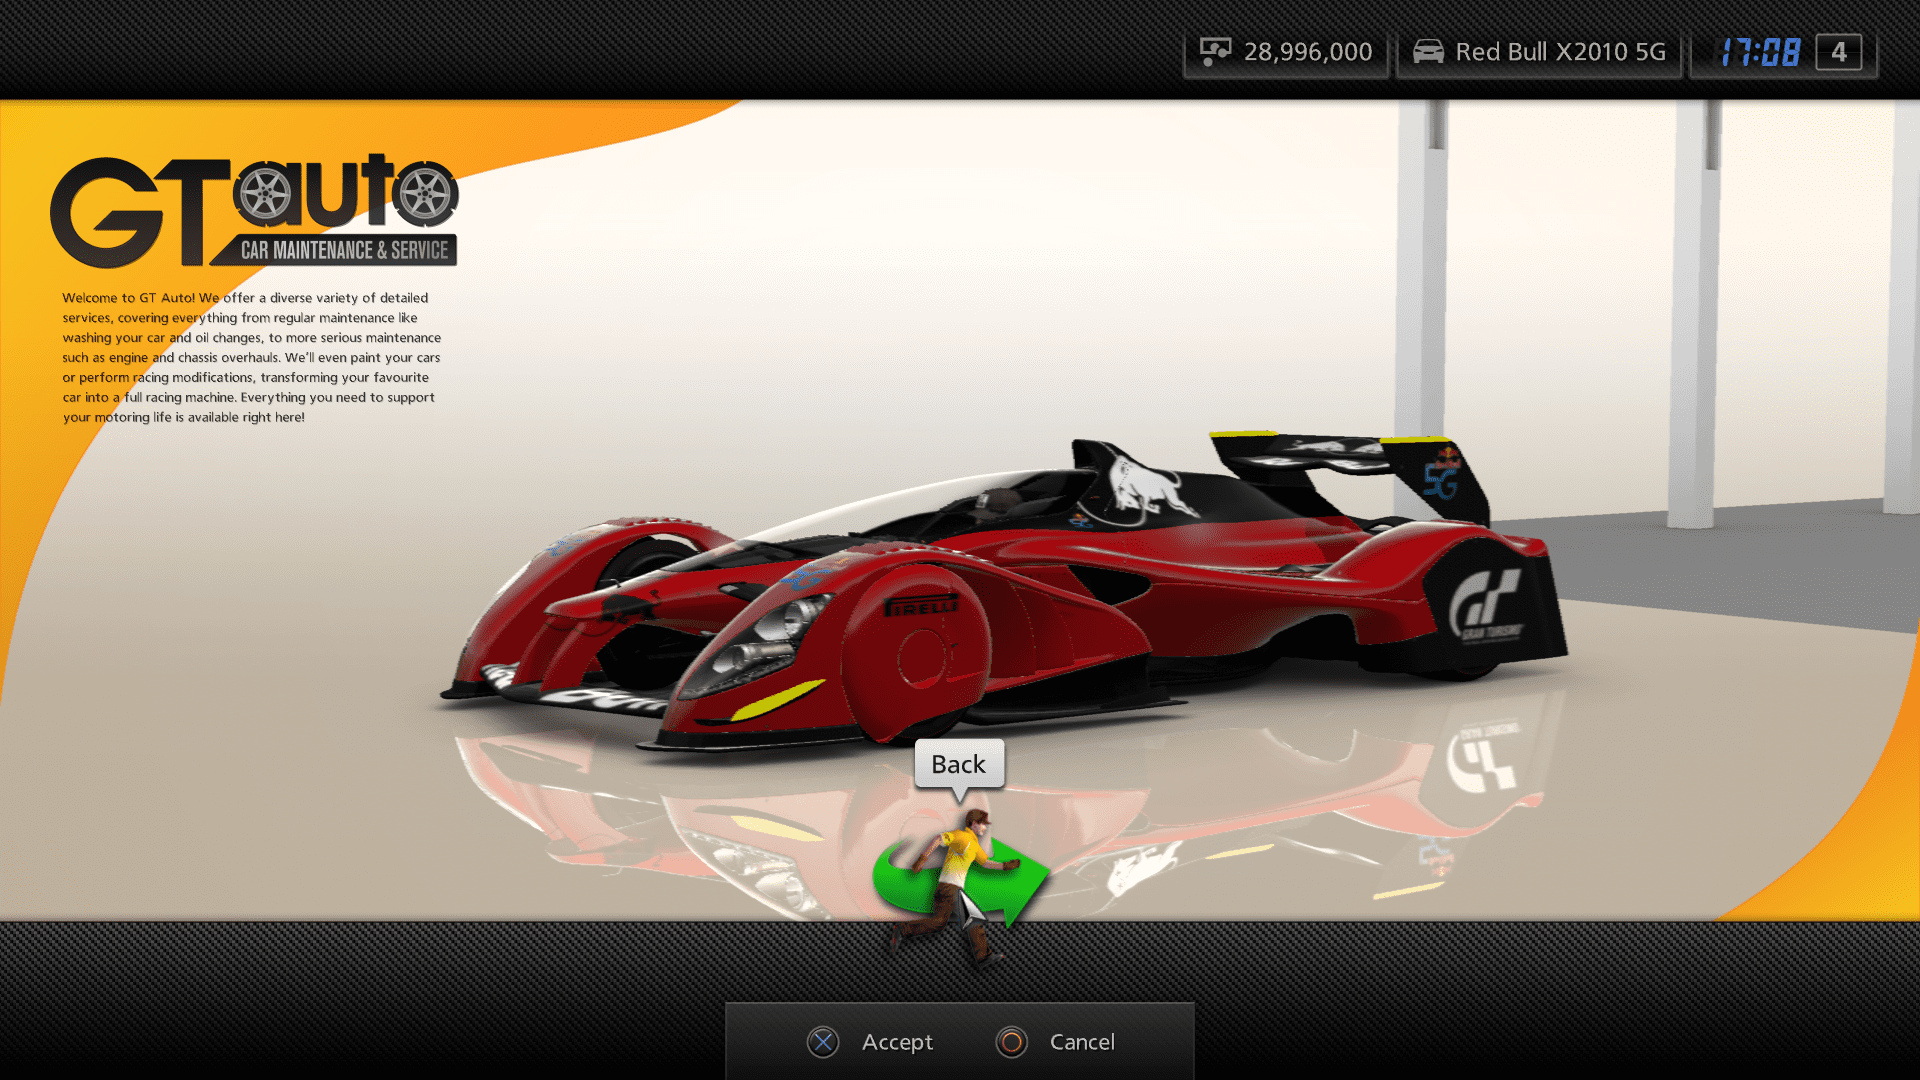 How to play and download Gran Turismo 5 on PC?